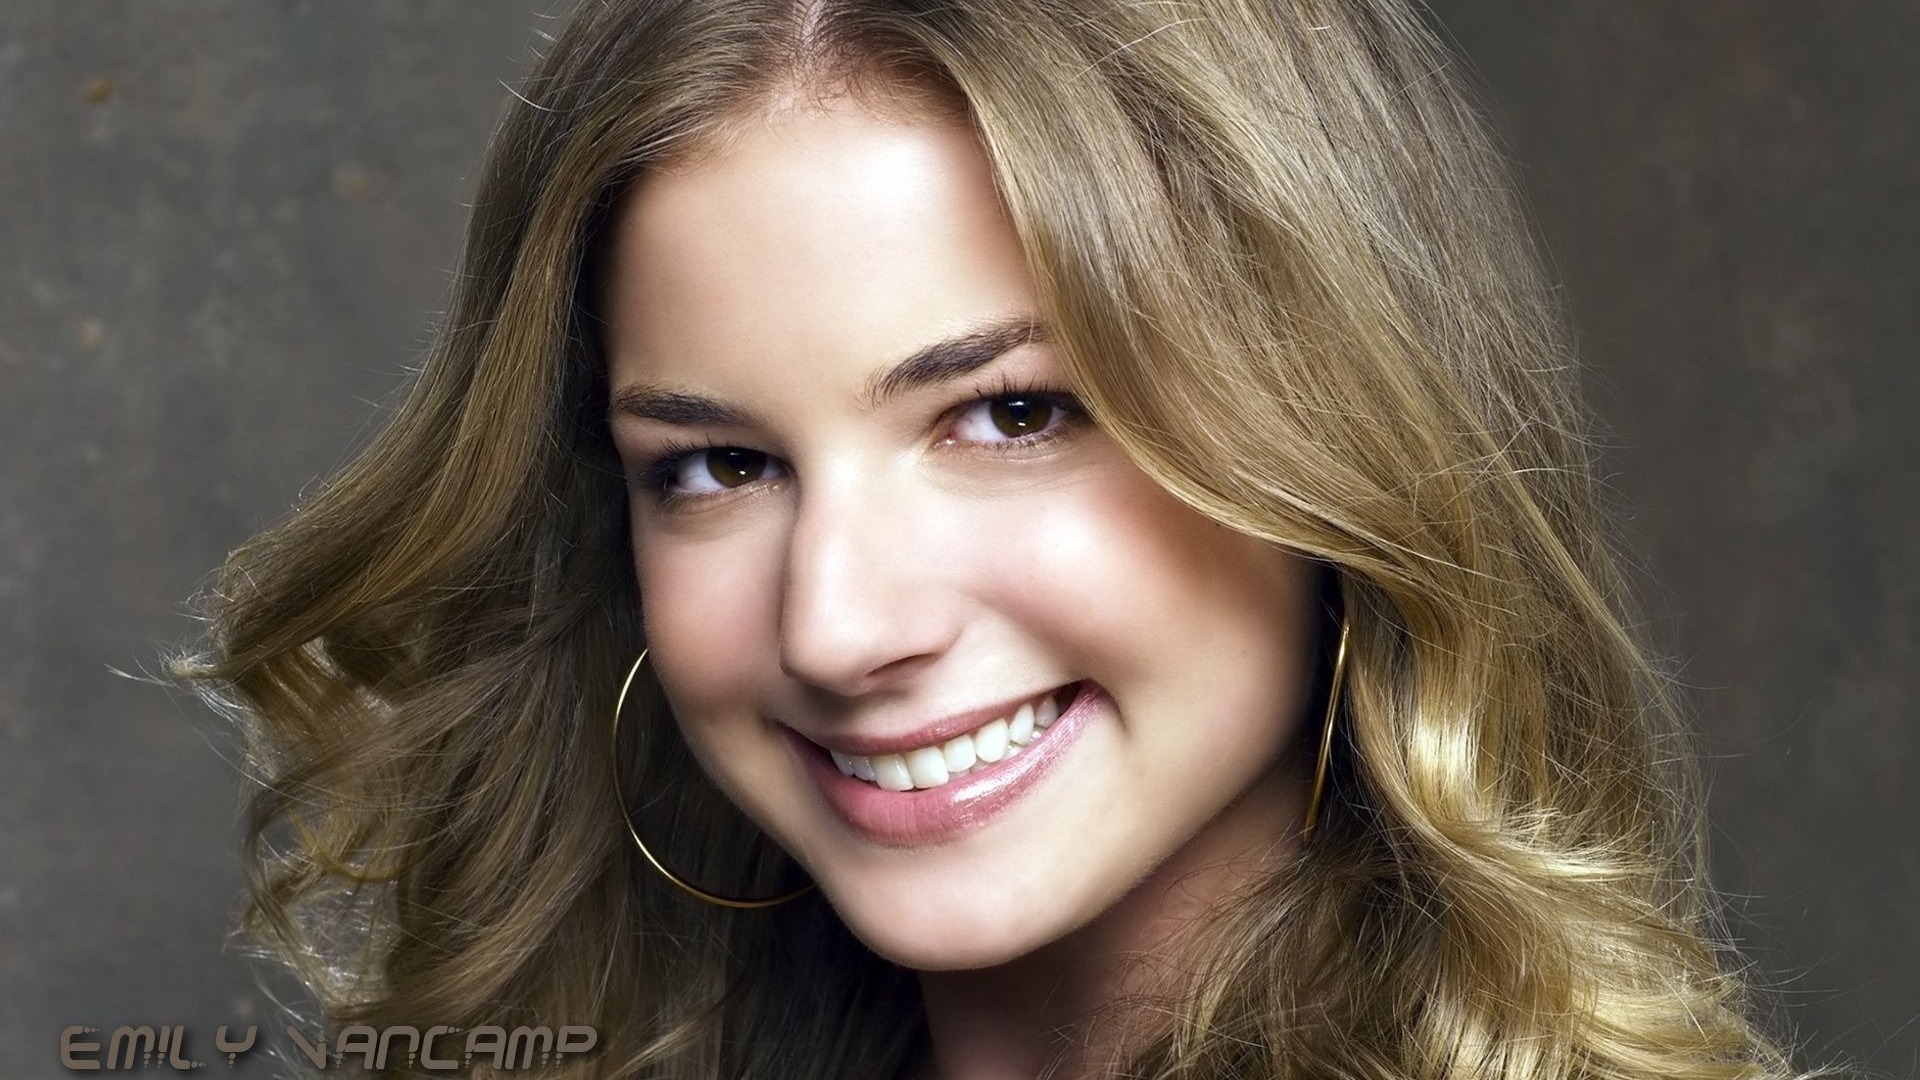 Emily VanCamp #006 - 1920x1080 Wallpapers Pictures Photos Images